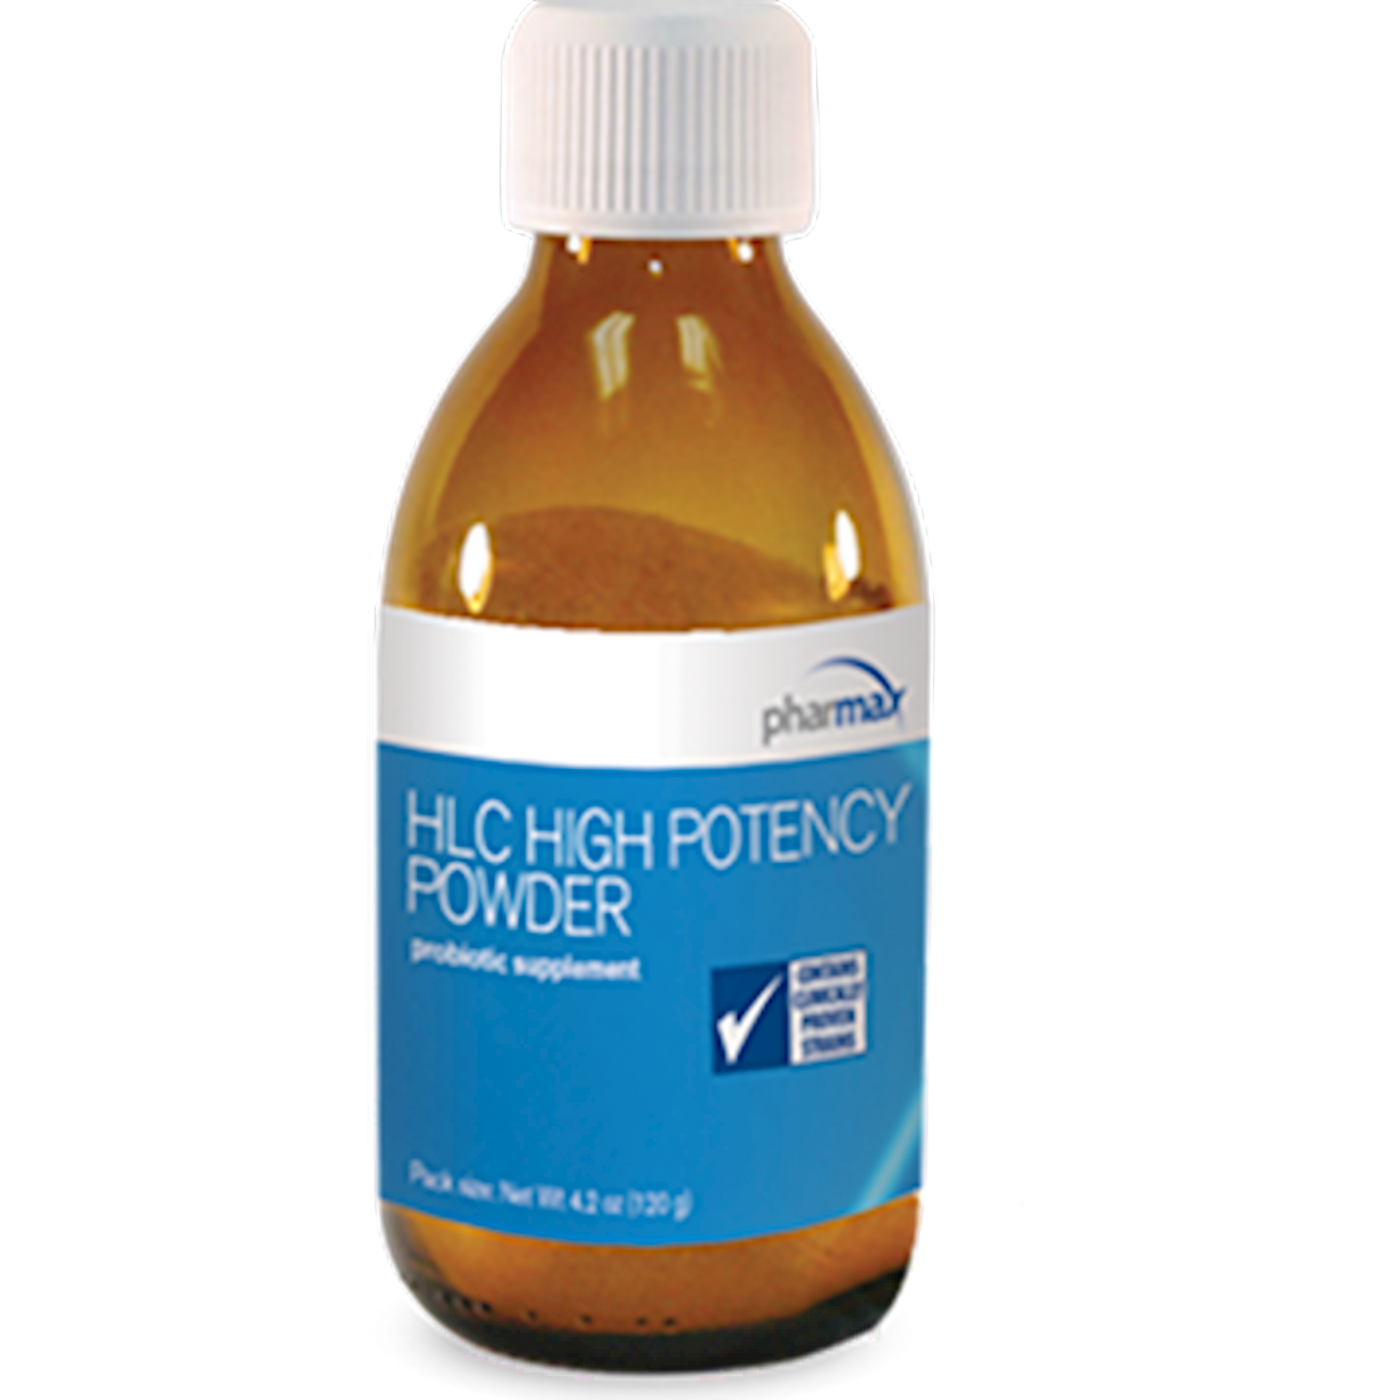 HLC High Potency Powder 4.2 oz Curated Wellness